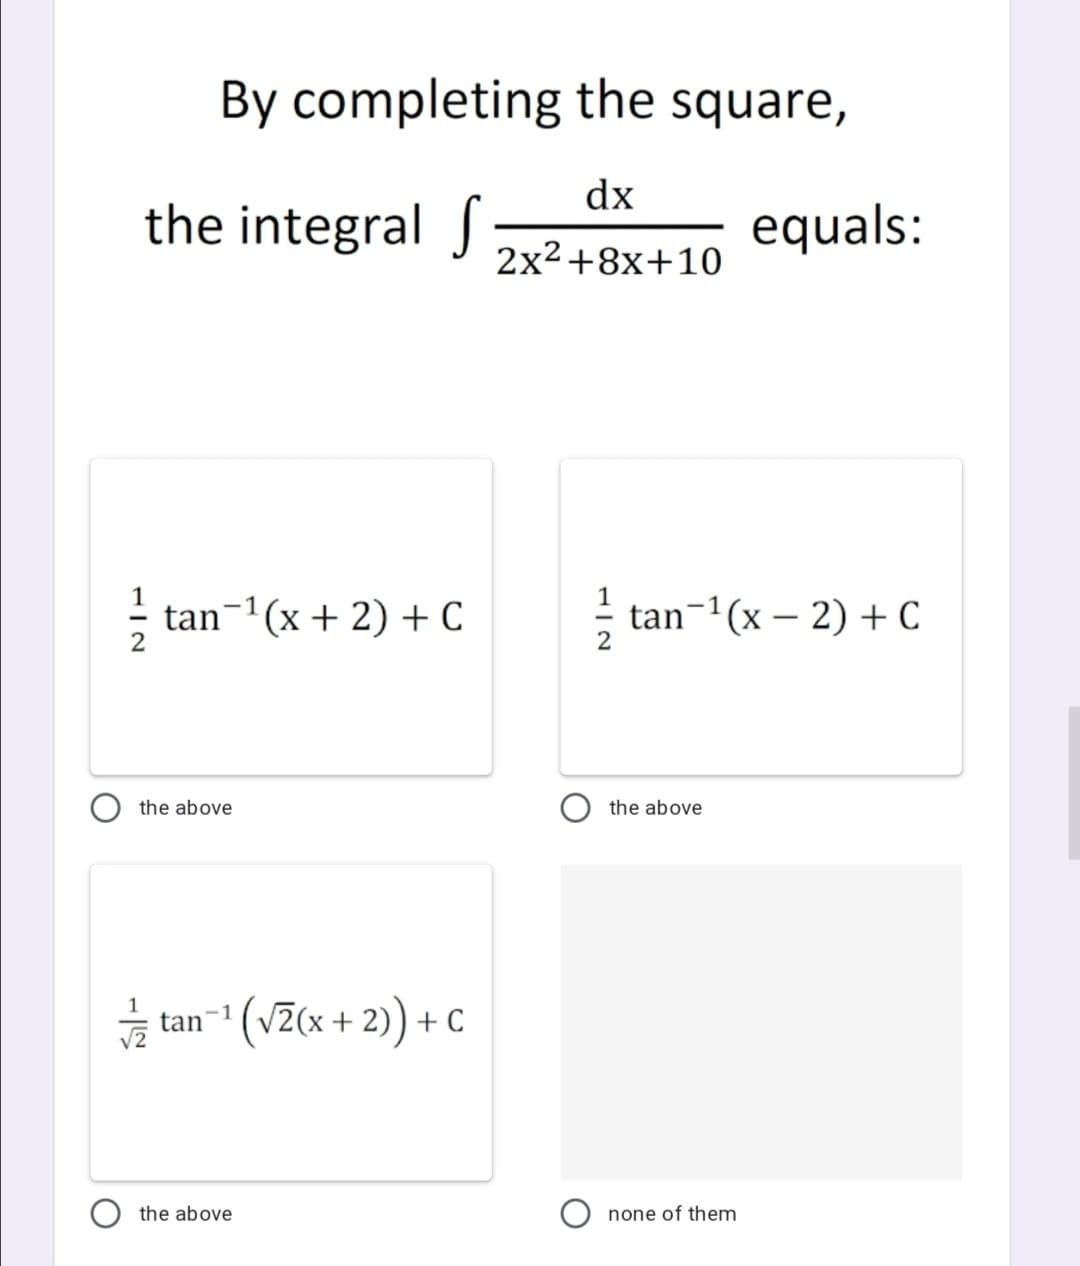 By completing the square,
dx
the integral S
equals:
2x2+8x+10
tan¬1(x + 2) + C
tan-1(x – 2) + C
the above
the above
tan- (VZ(x + 2) + C
the above
none of them
